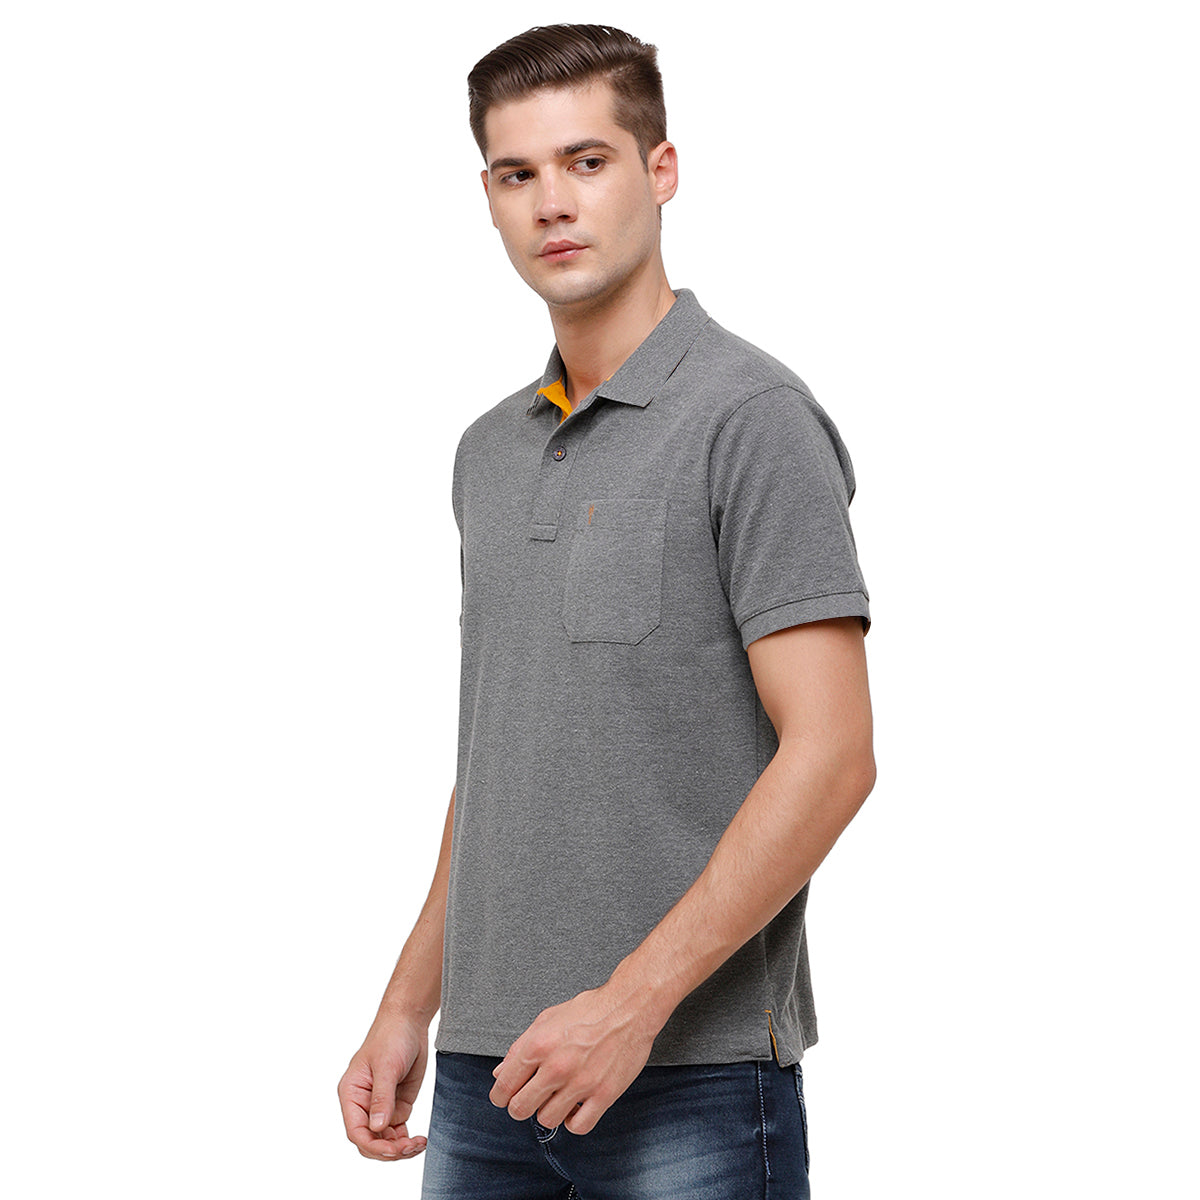 Classic polo Men's Dark Grey Color Authentic fit polo neck T-shirt - 4SSN 225 T-shirt Classic Polo 